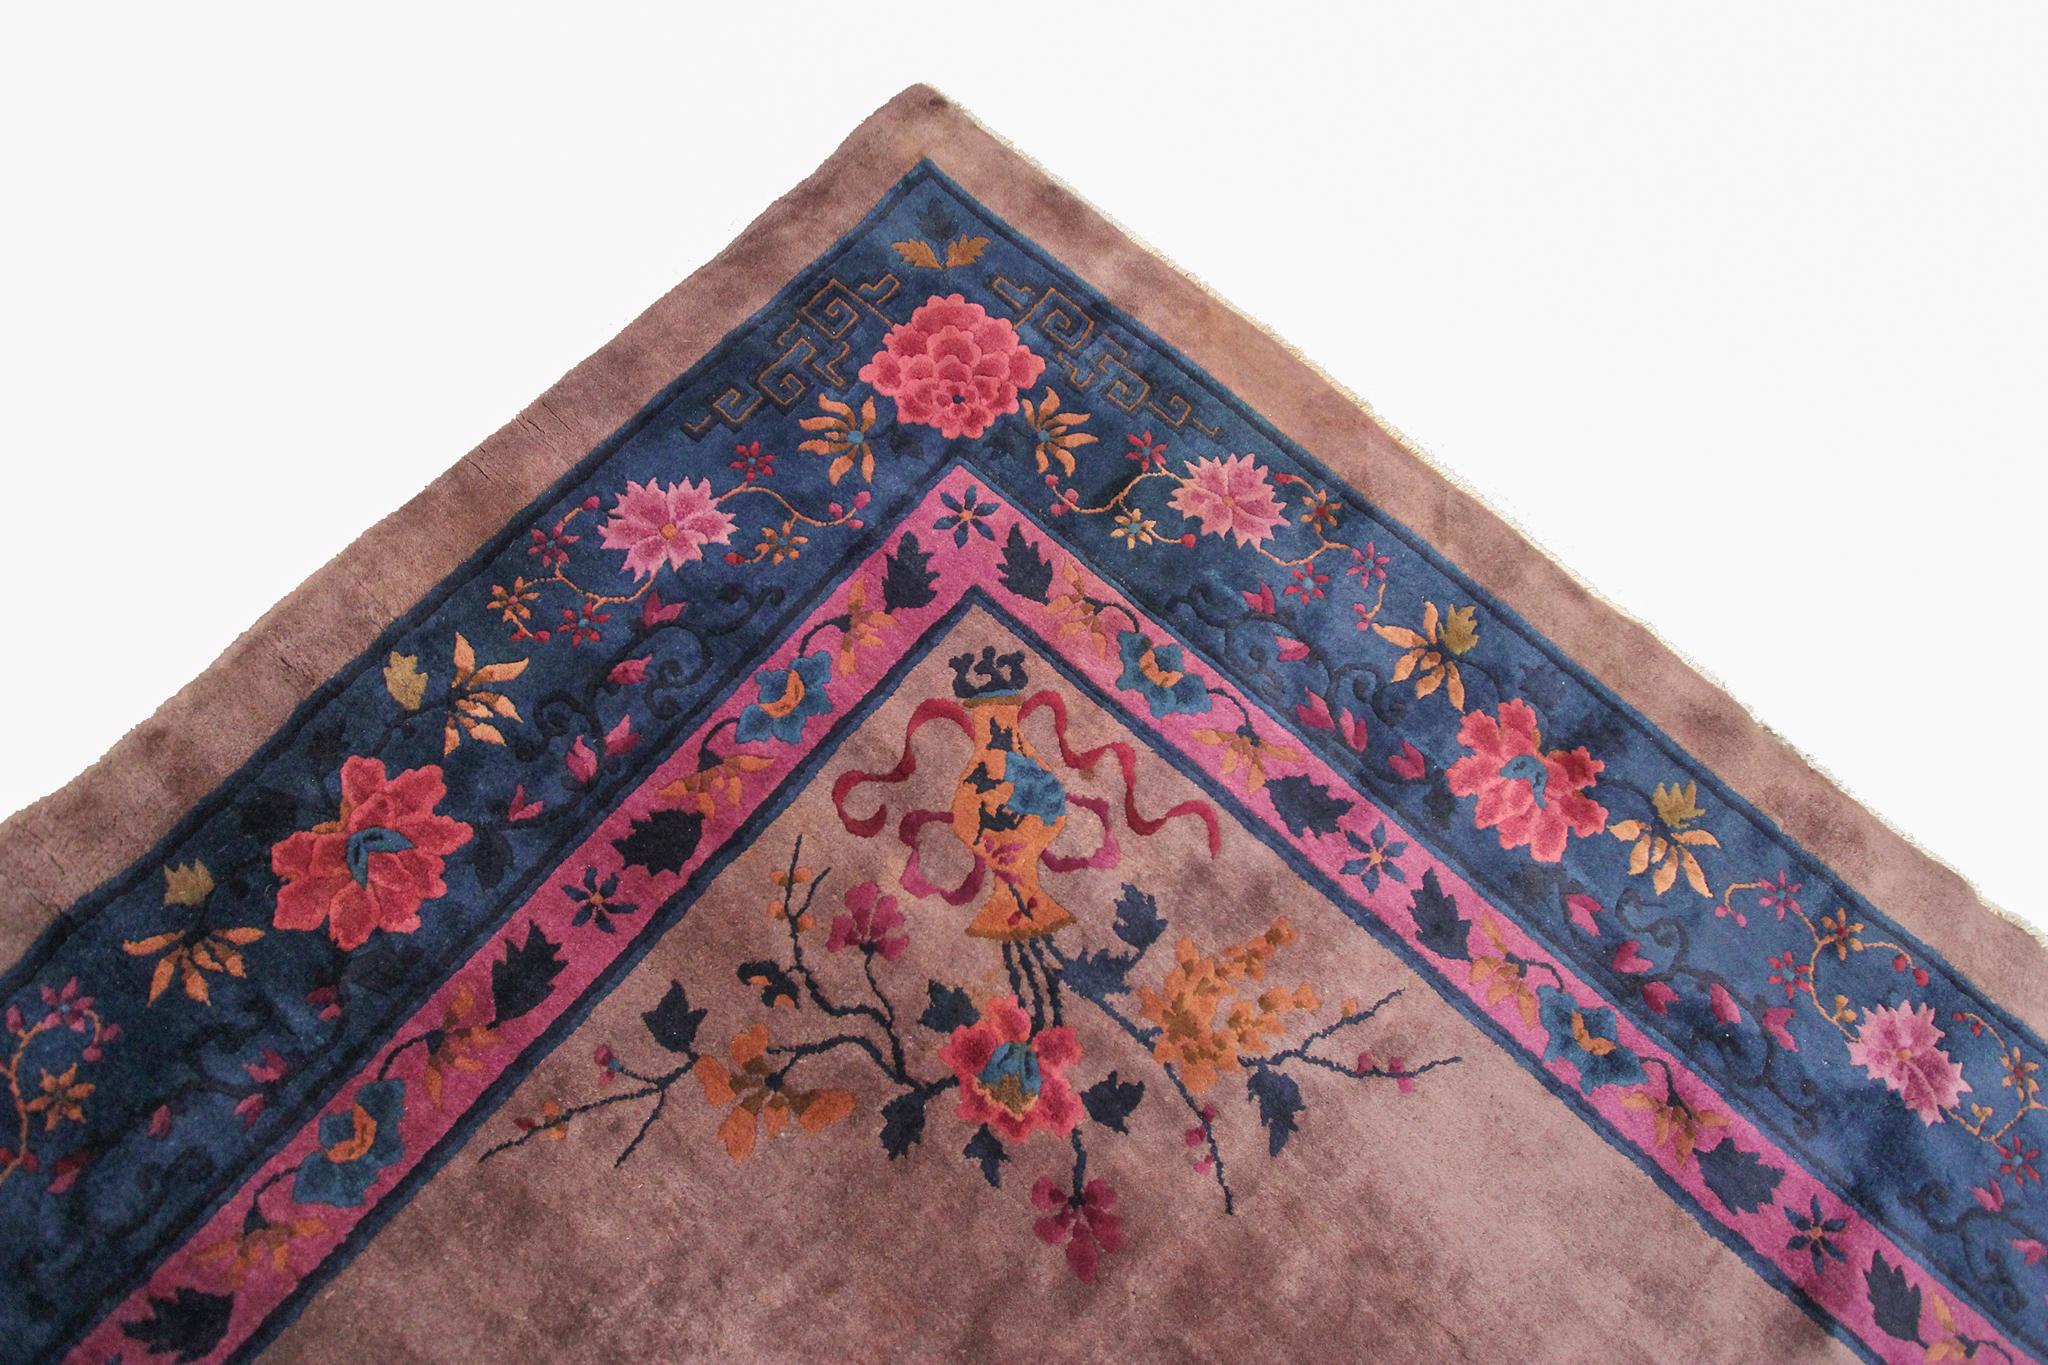 Antique Art Deco Rug Antique Chinese Walter Nichols Rug 1920 9x12 275cm x 361cm  In Good Condition For Sale In New York, NY